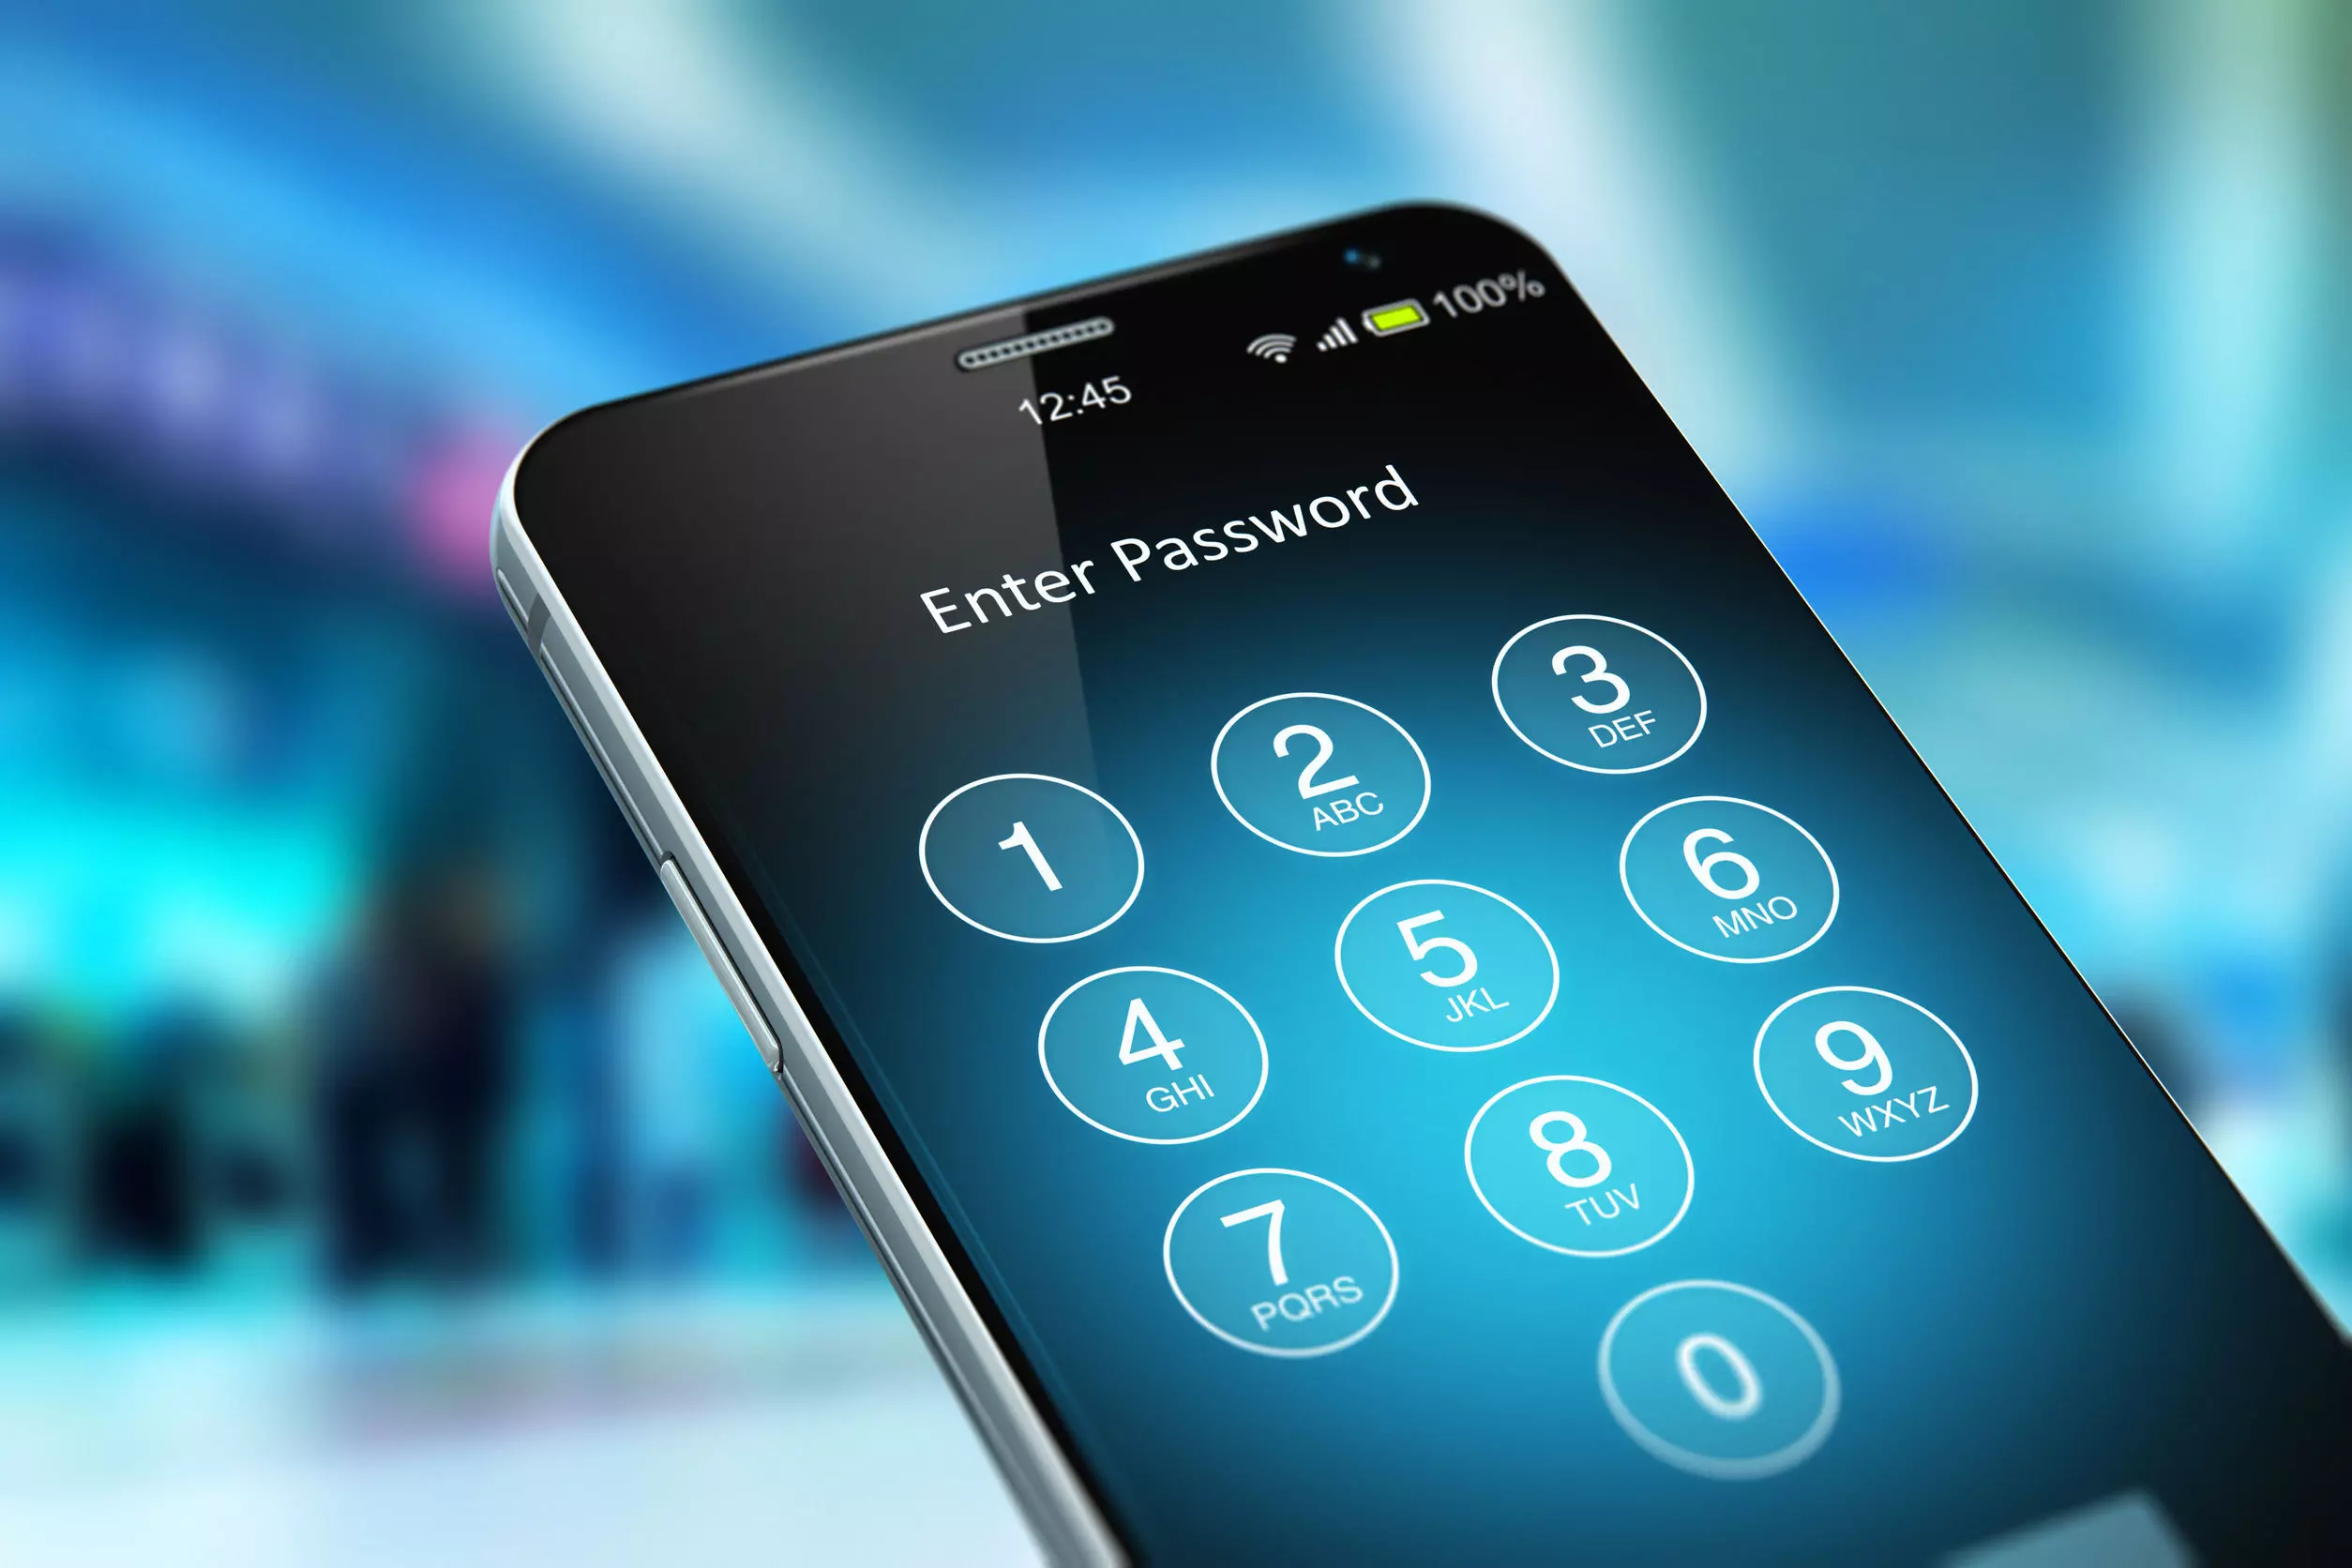 How to unlock an Android smartphone if you have forgotten the password